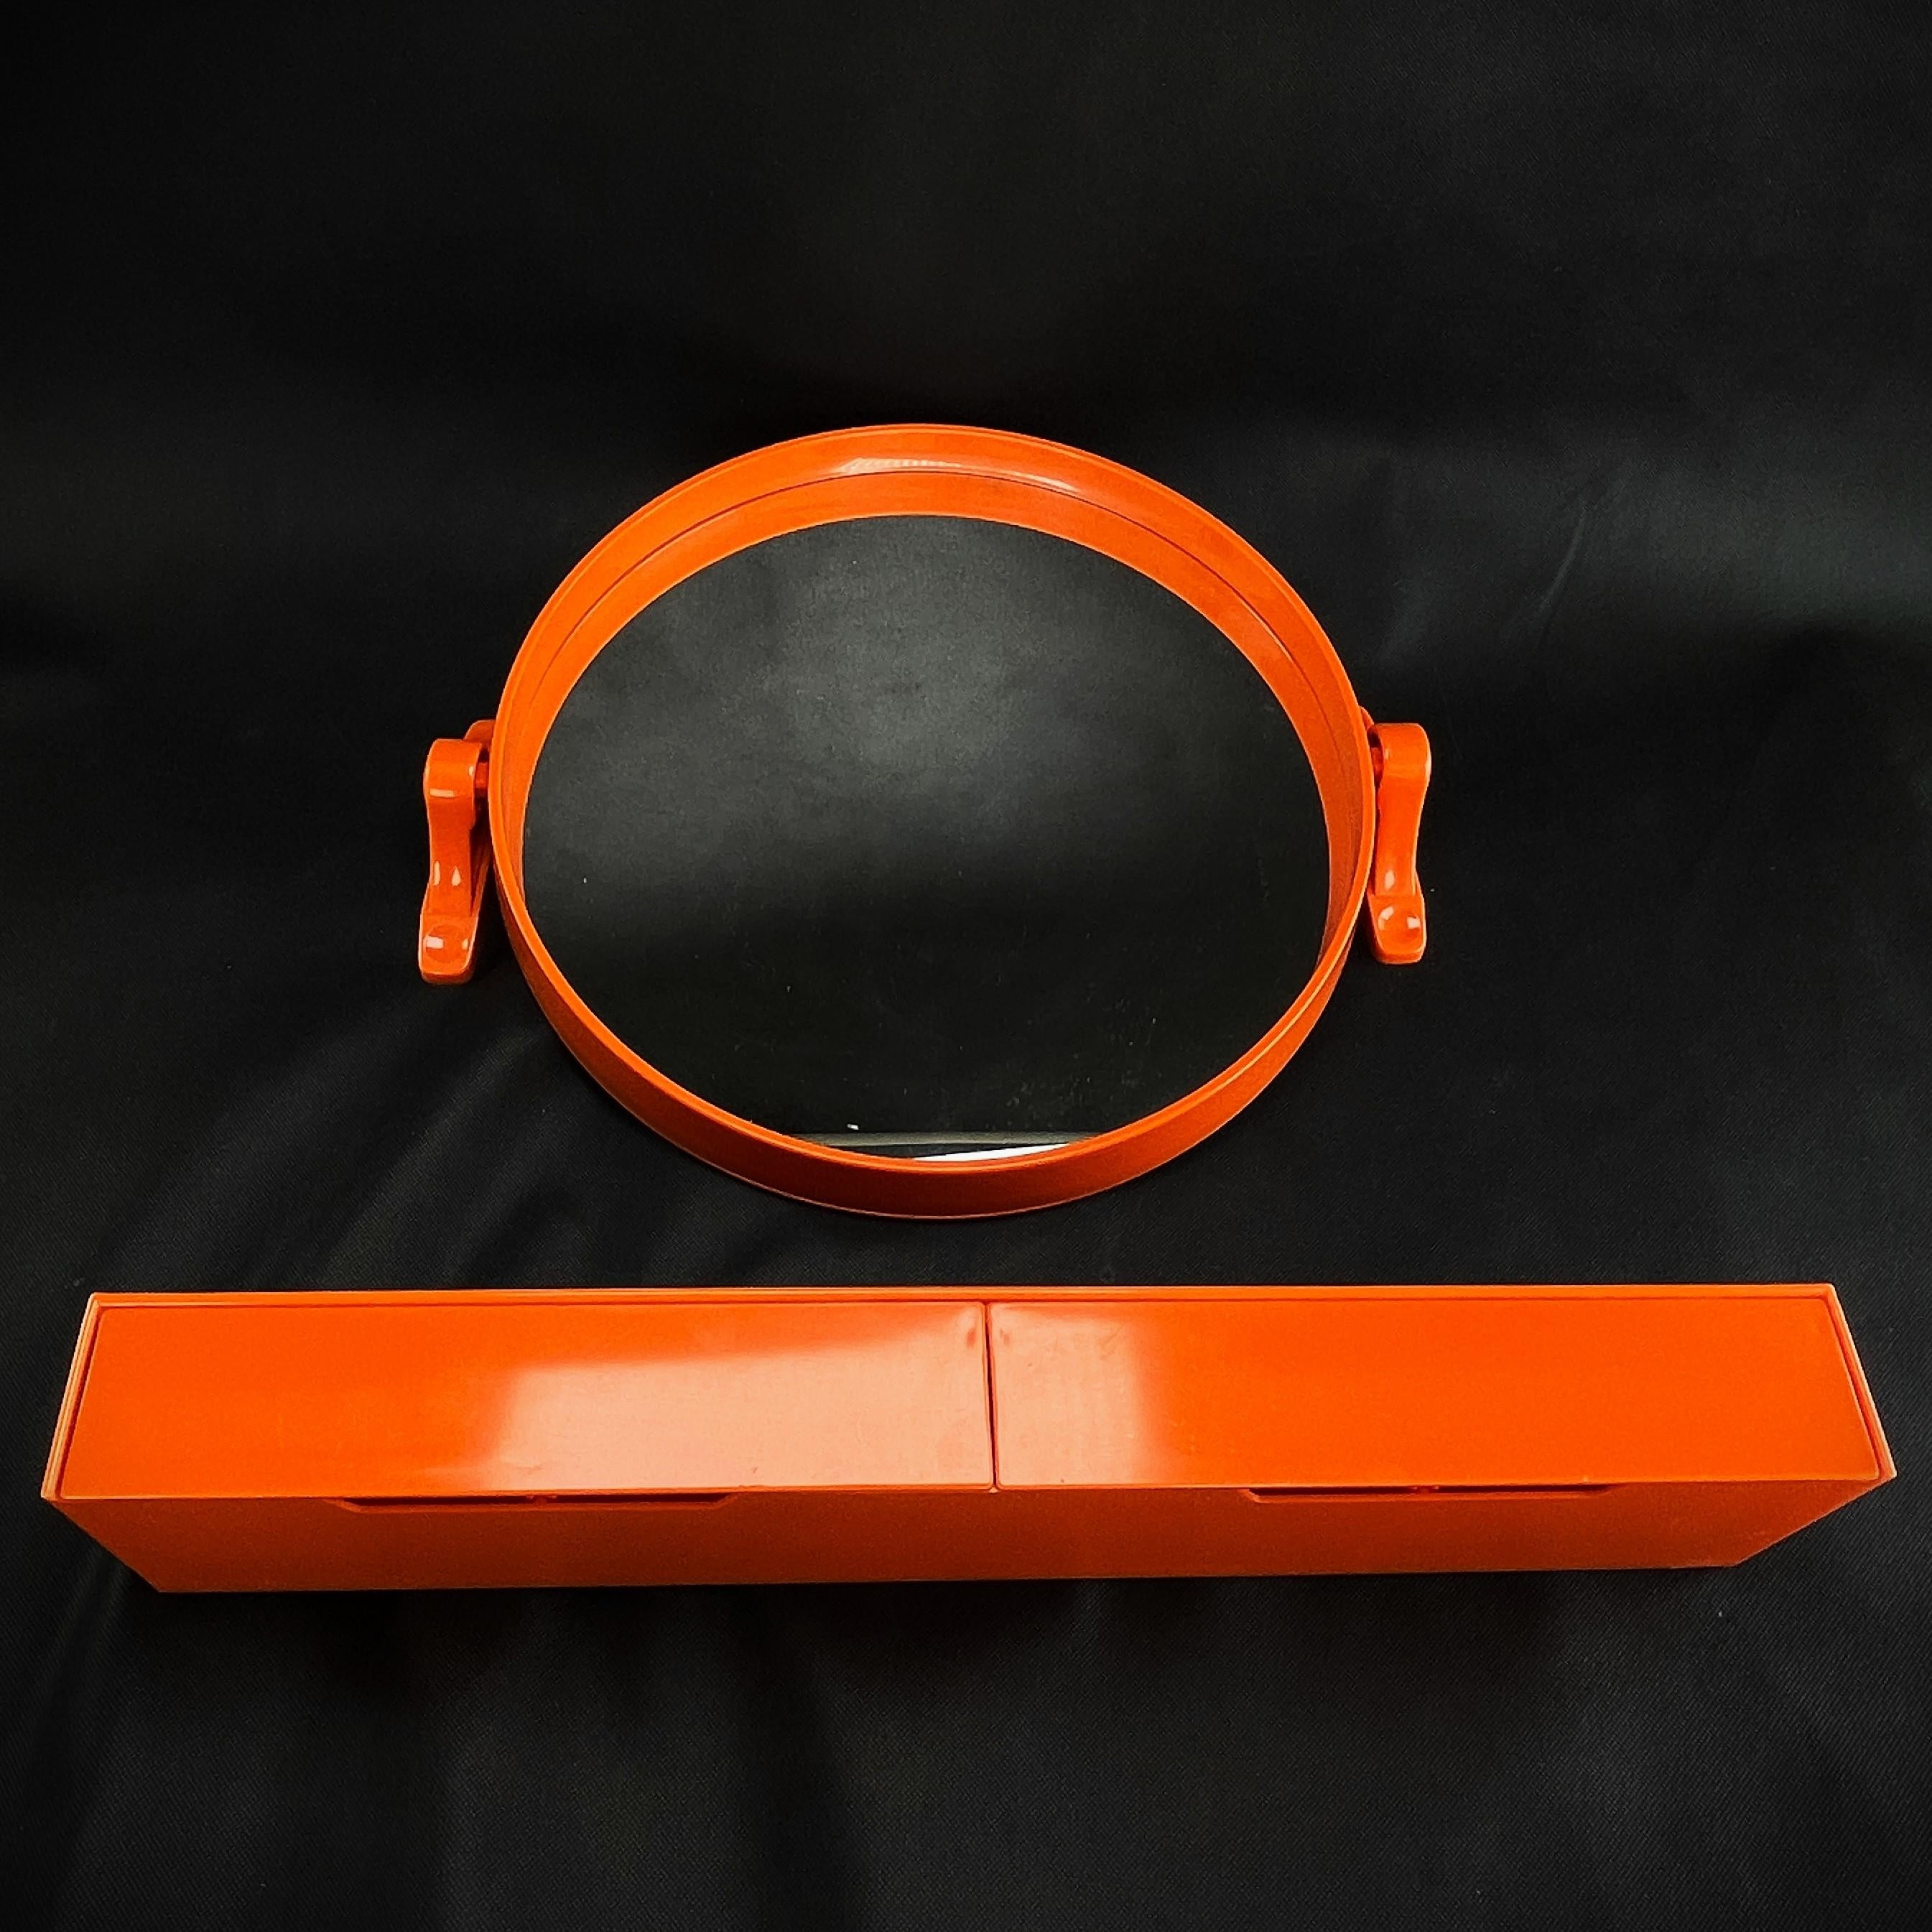 Orange Wall mirror with storage board - 1970s

The designer of this extraordinary object managed to combine functionality, design, style and aesthetics. Even today, this mirror is an absolute eye-catcher.
The midcentury mirror is a stunning wall